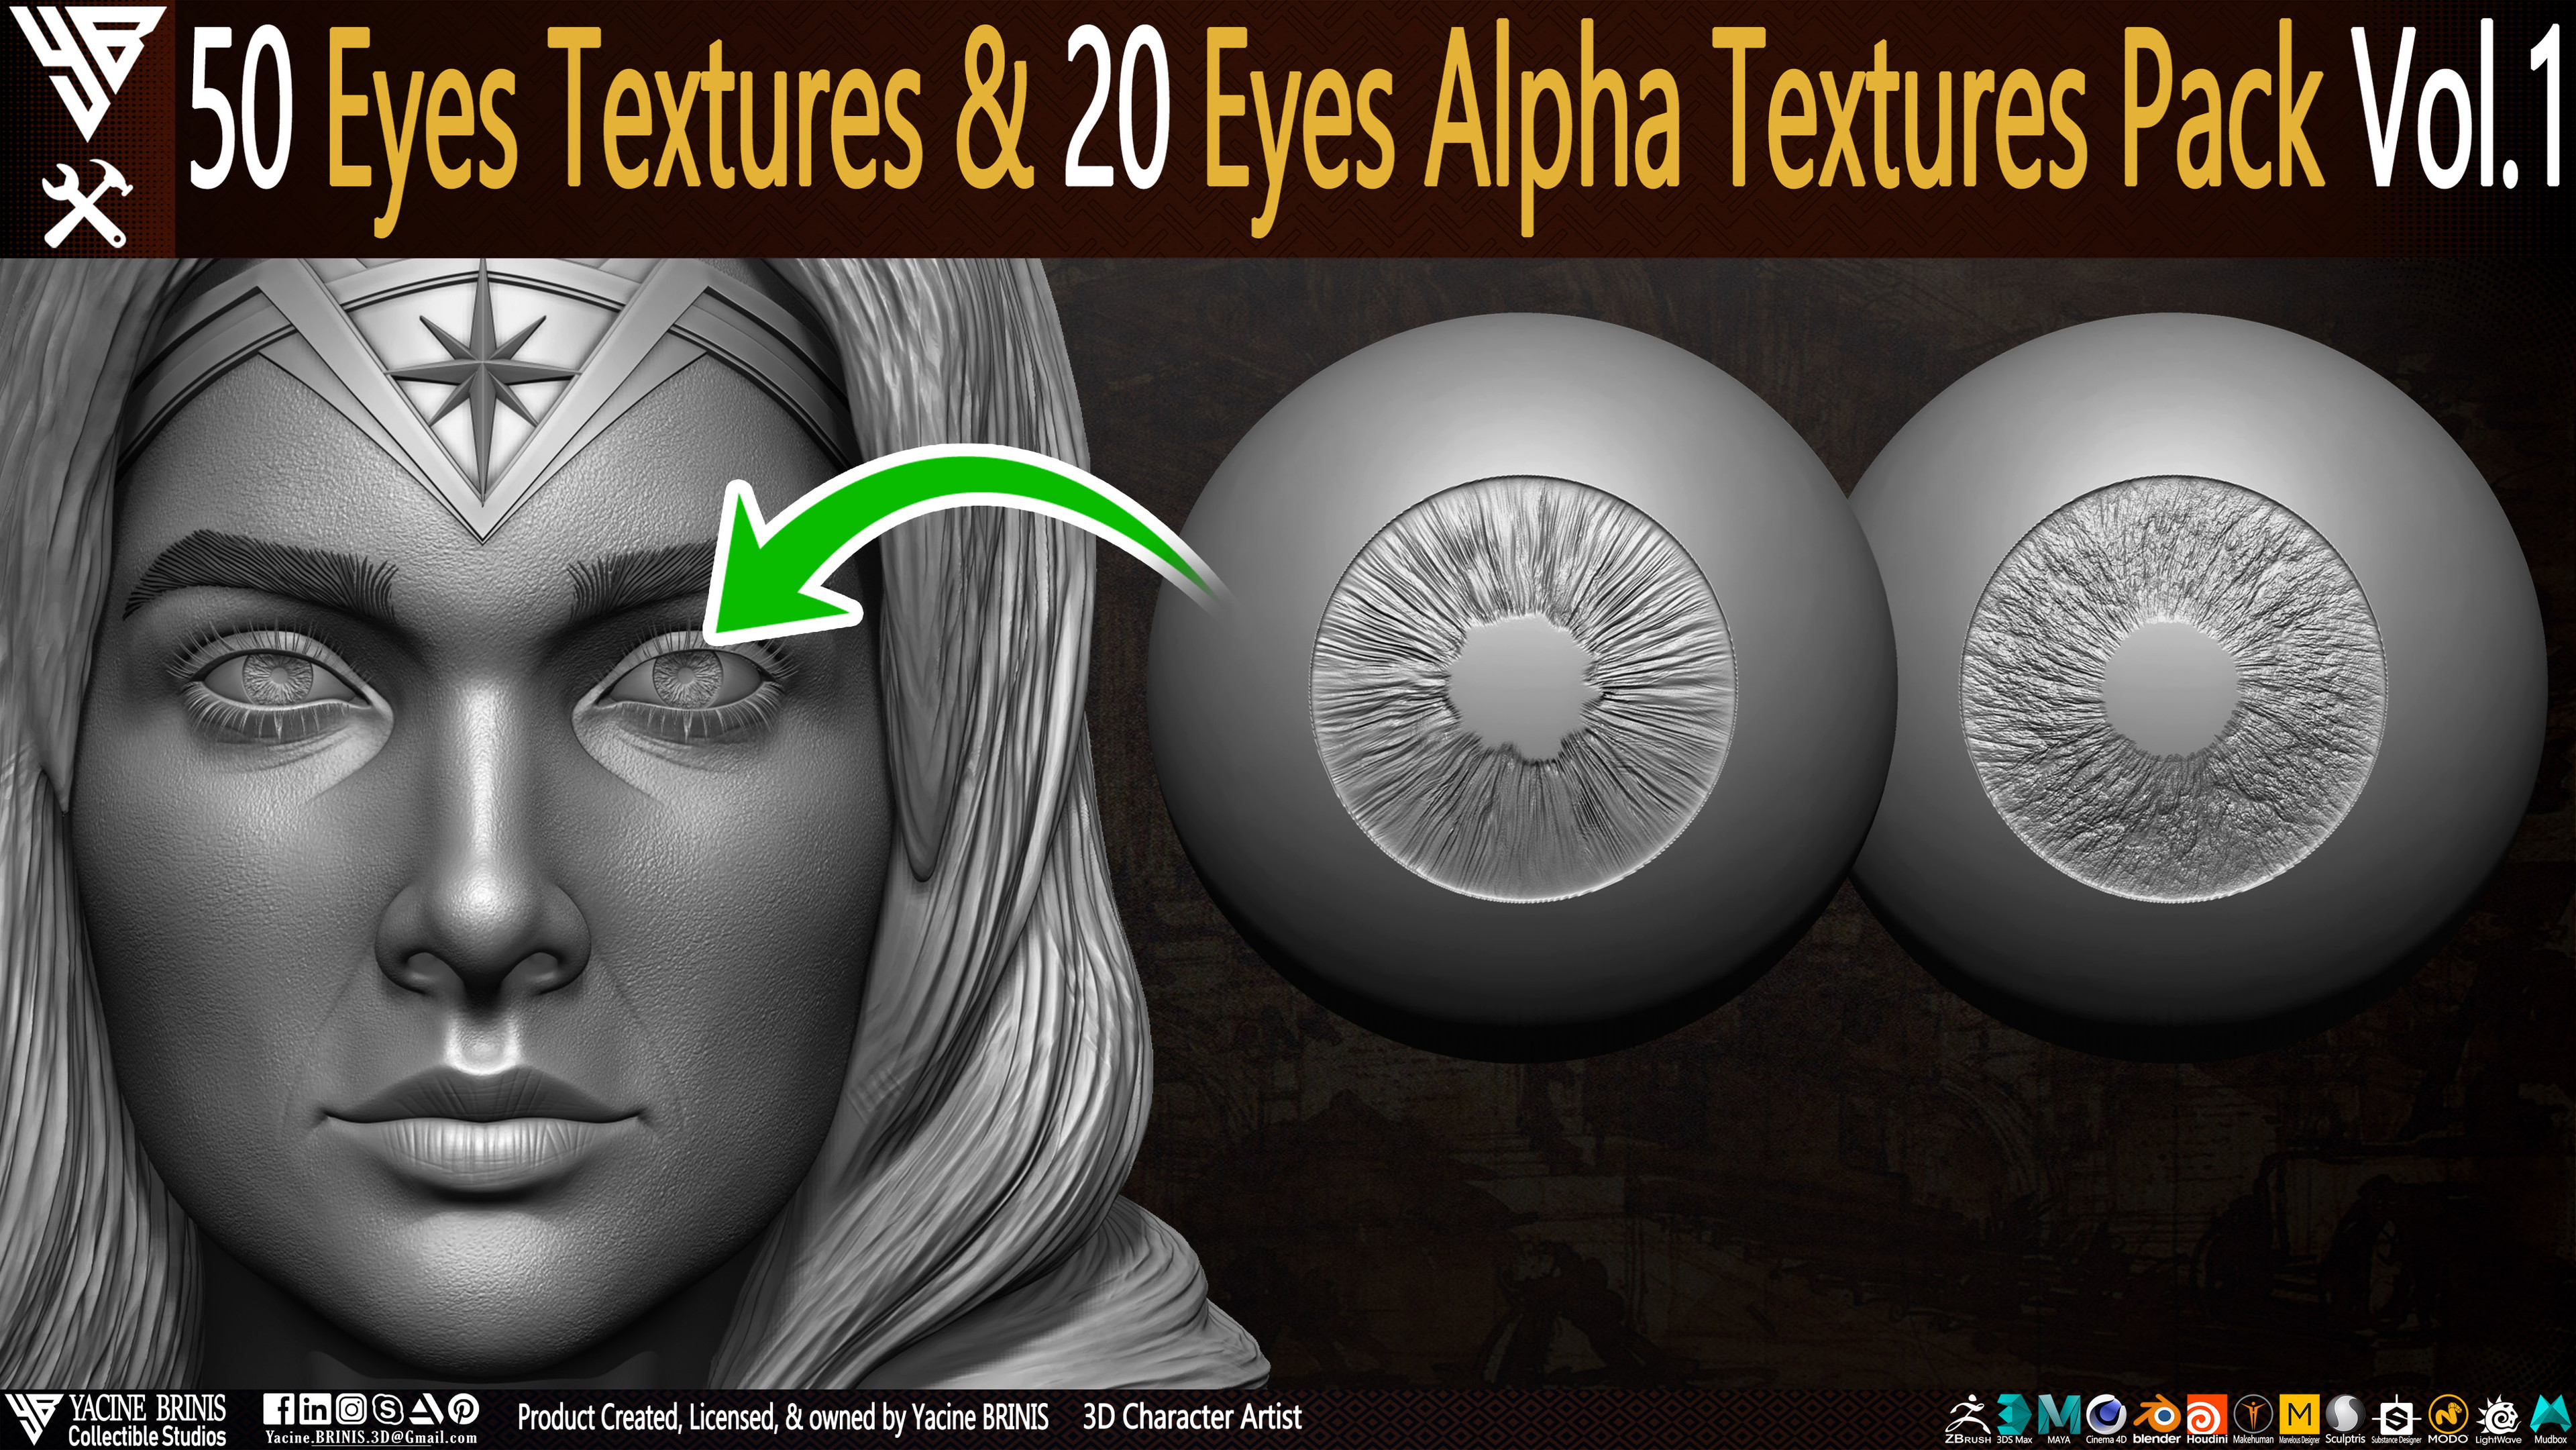 50 Eyes Textures and 20 Eyes Alpha Textures Pack Vol 01 sculpted by Yacine BRINIS Set 02